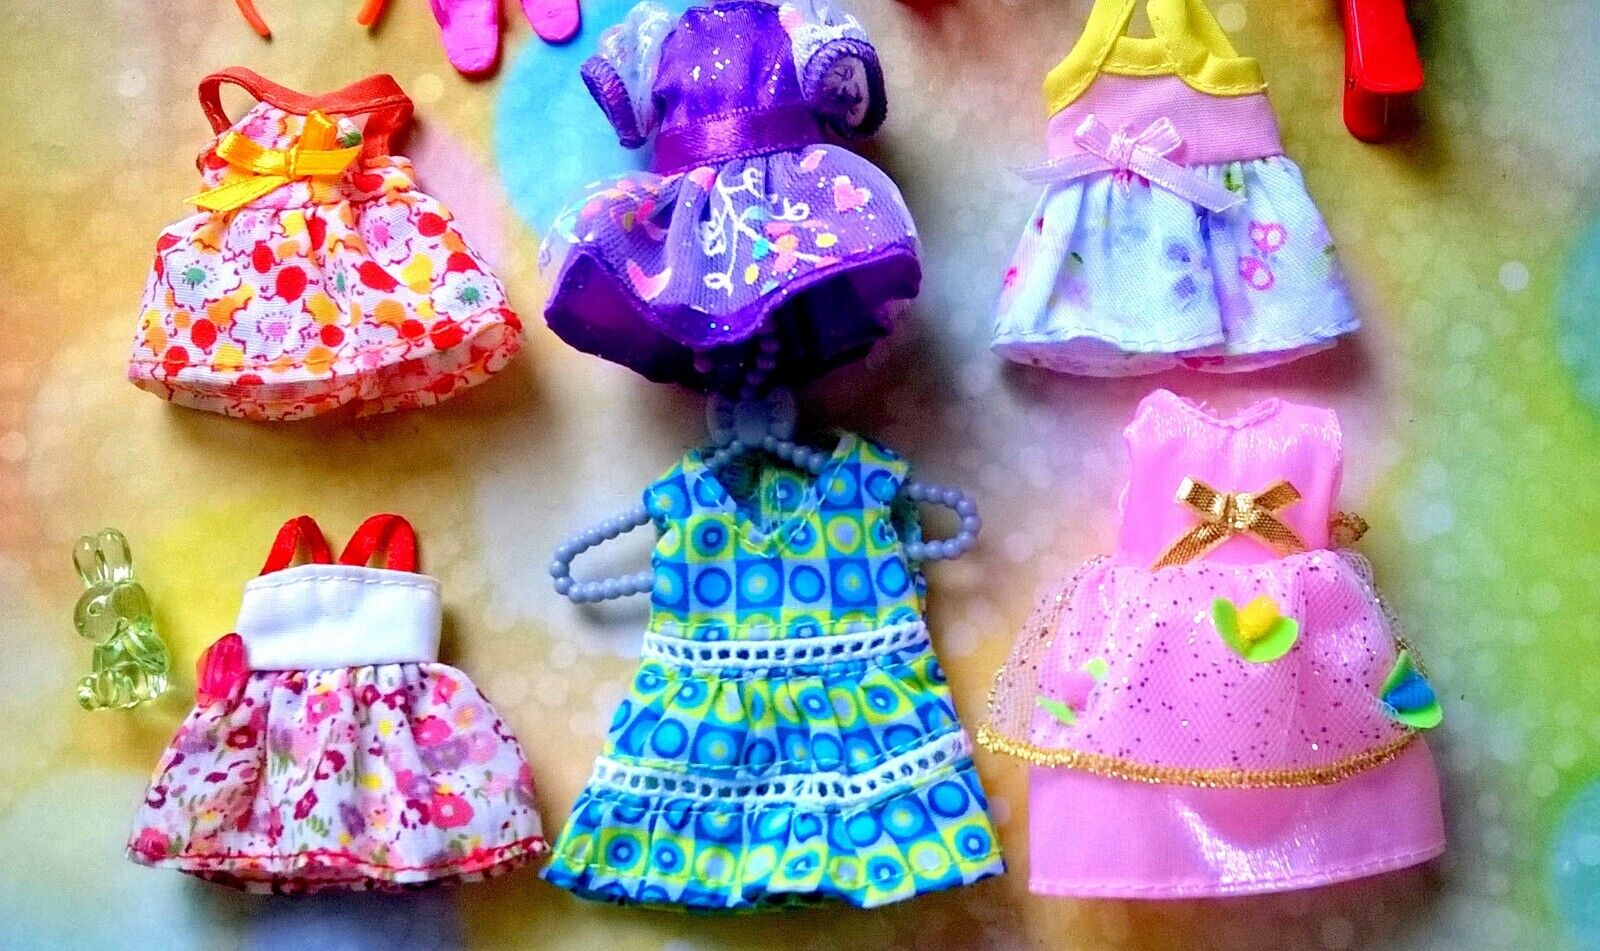 ???Barbie Kelly Chelsea doll clothes, accessories with shoes #E???